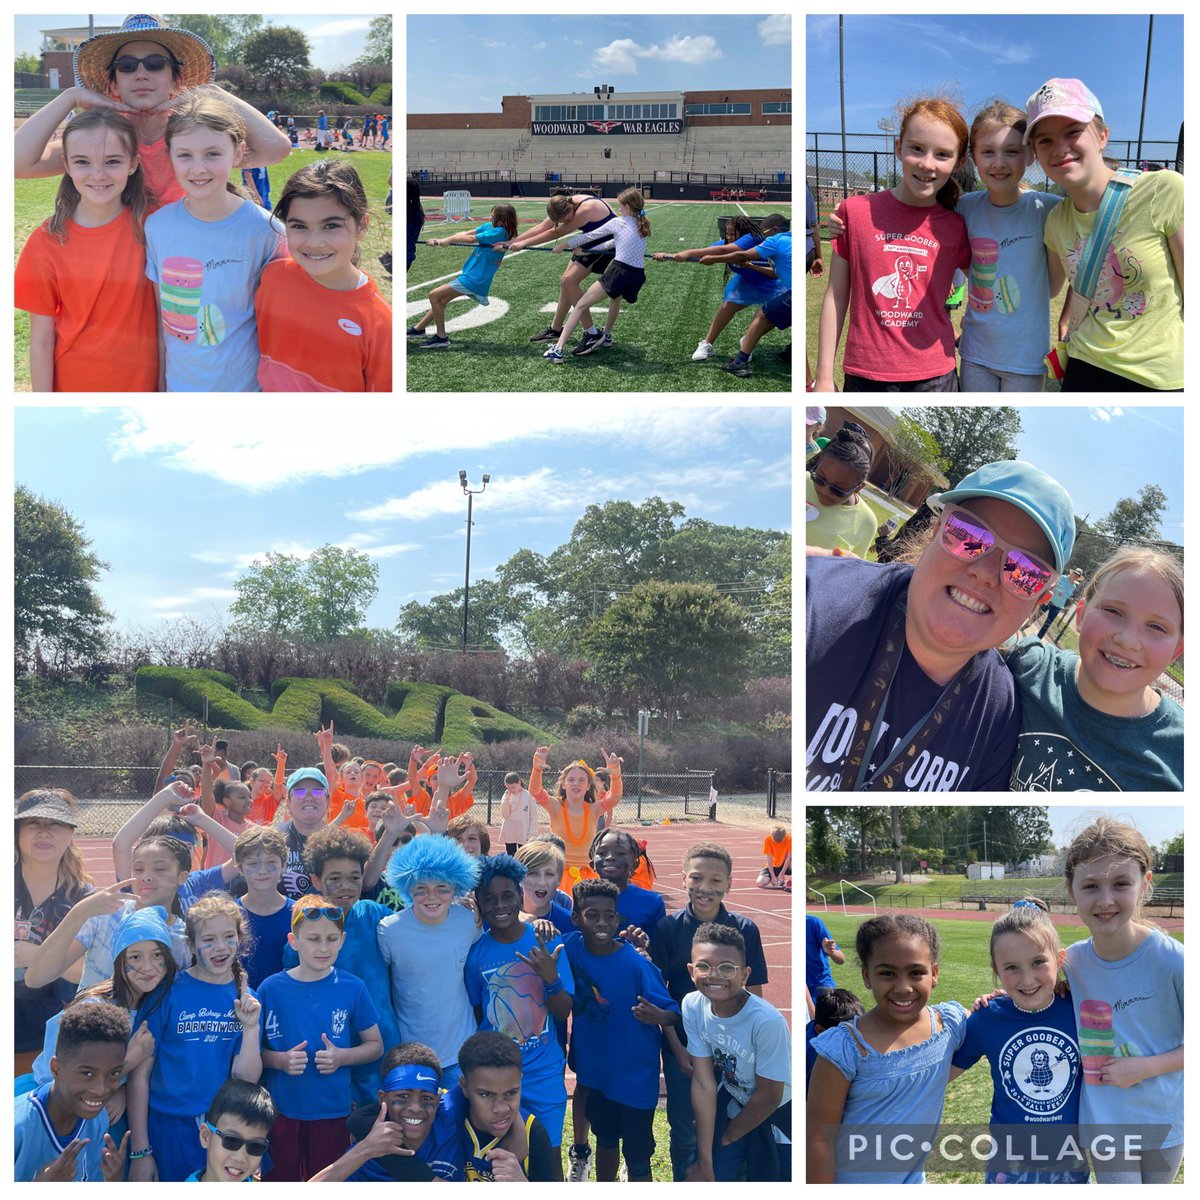 Field Day Fun at the Lower School!!! Thanks to Coach Stratton & all others for a fabulous day! @dandyphillips13 @WoodwardAcademy #woodwardway